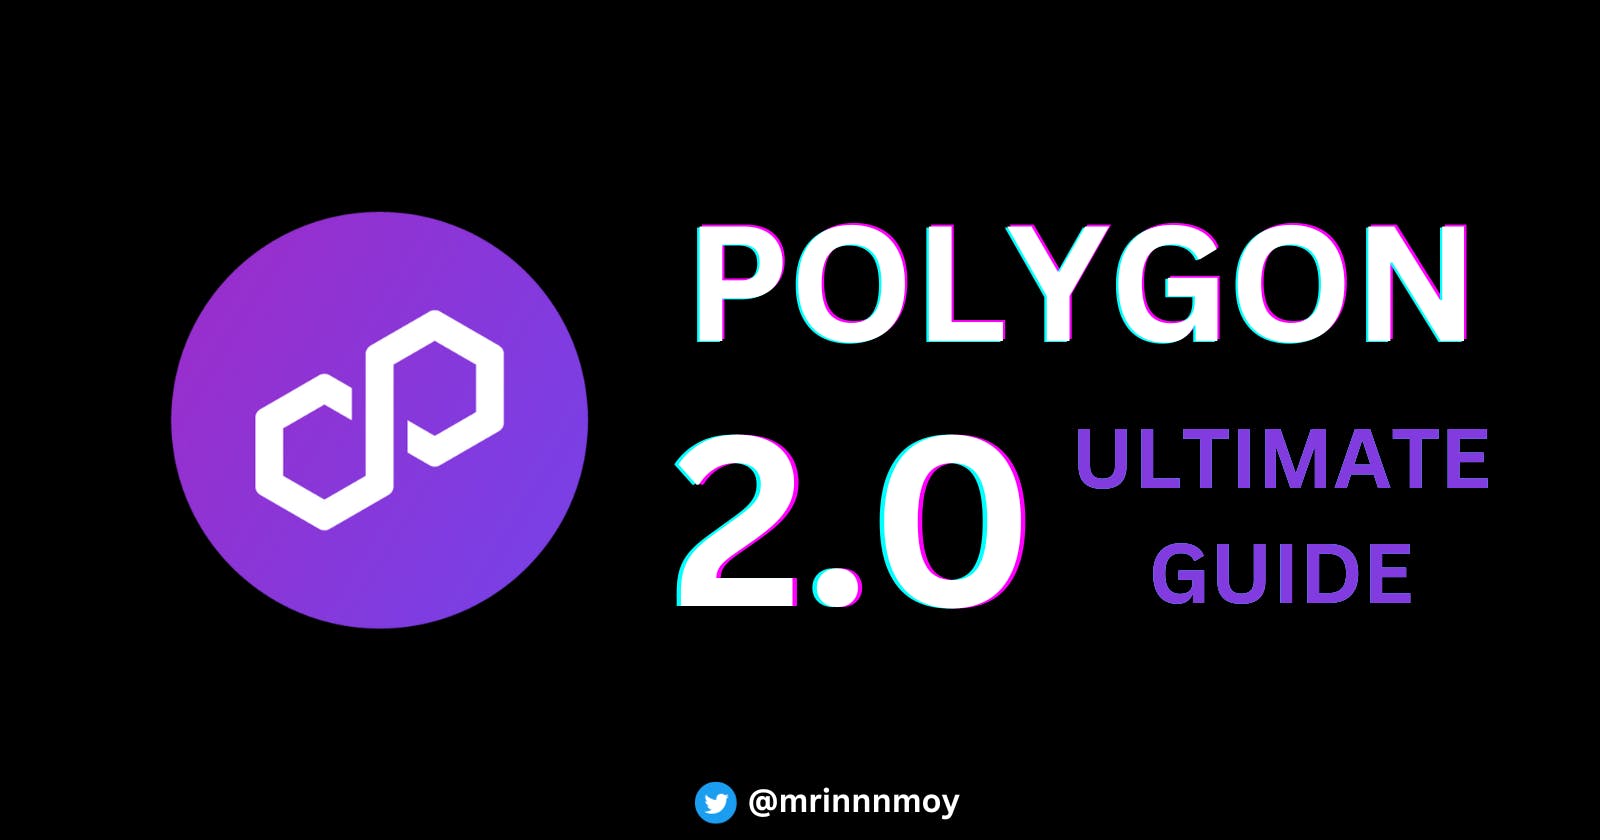 Polygon 2.0 : The Ultimate Guide